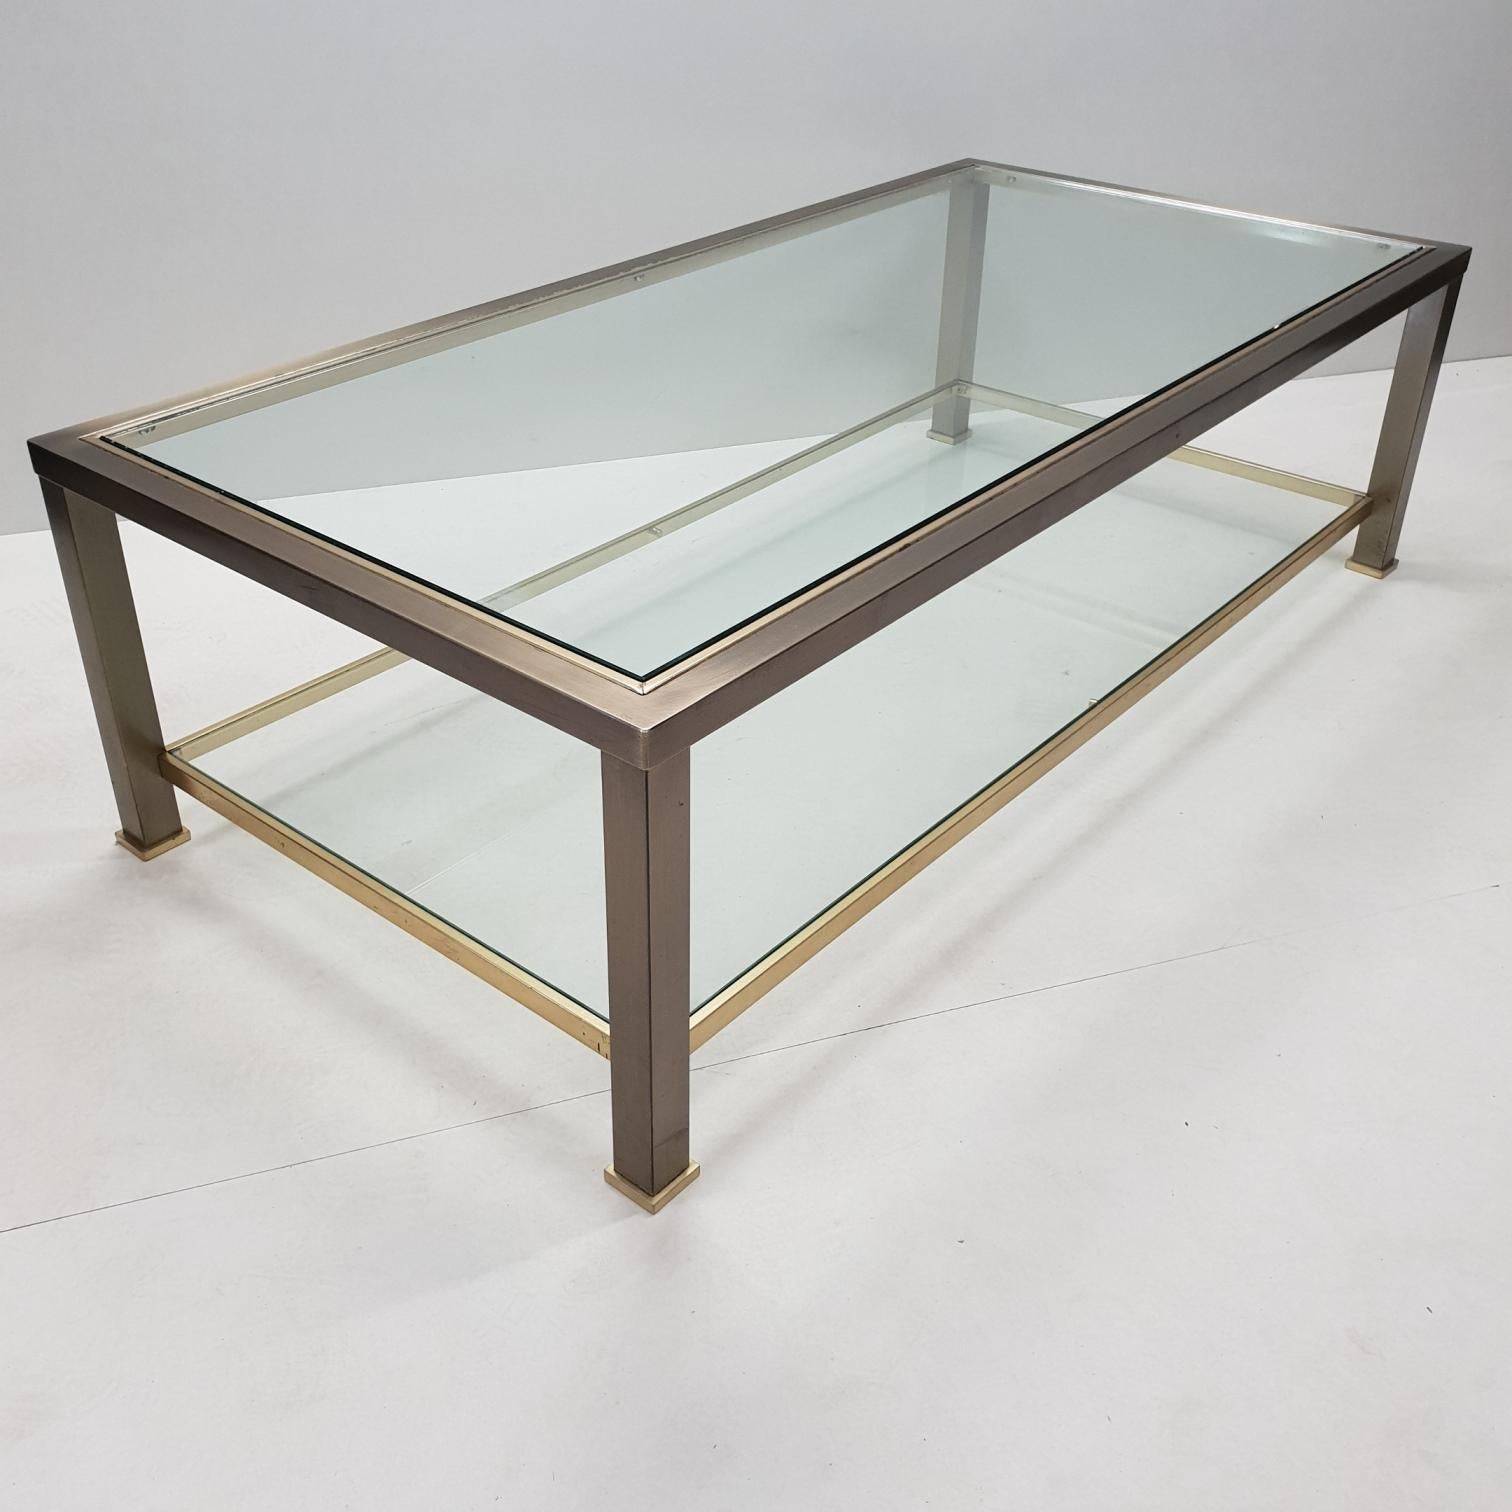 20th Century Brass 2-Tiers Coffee Table with Cut Glass from Belgo Chrom, 1980s For Sale